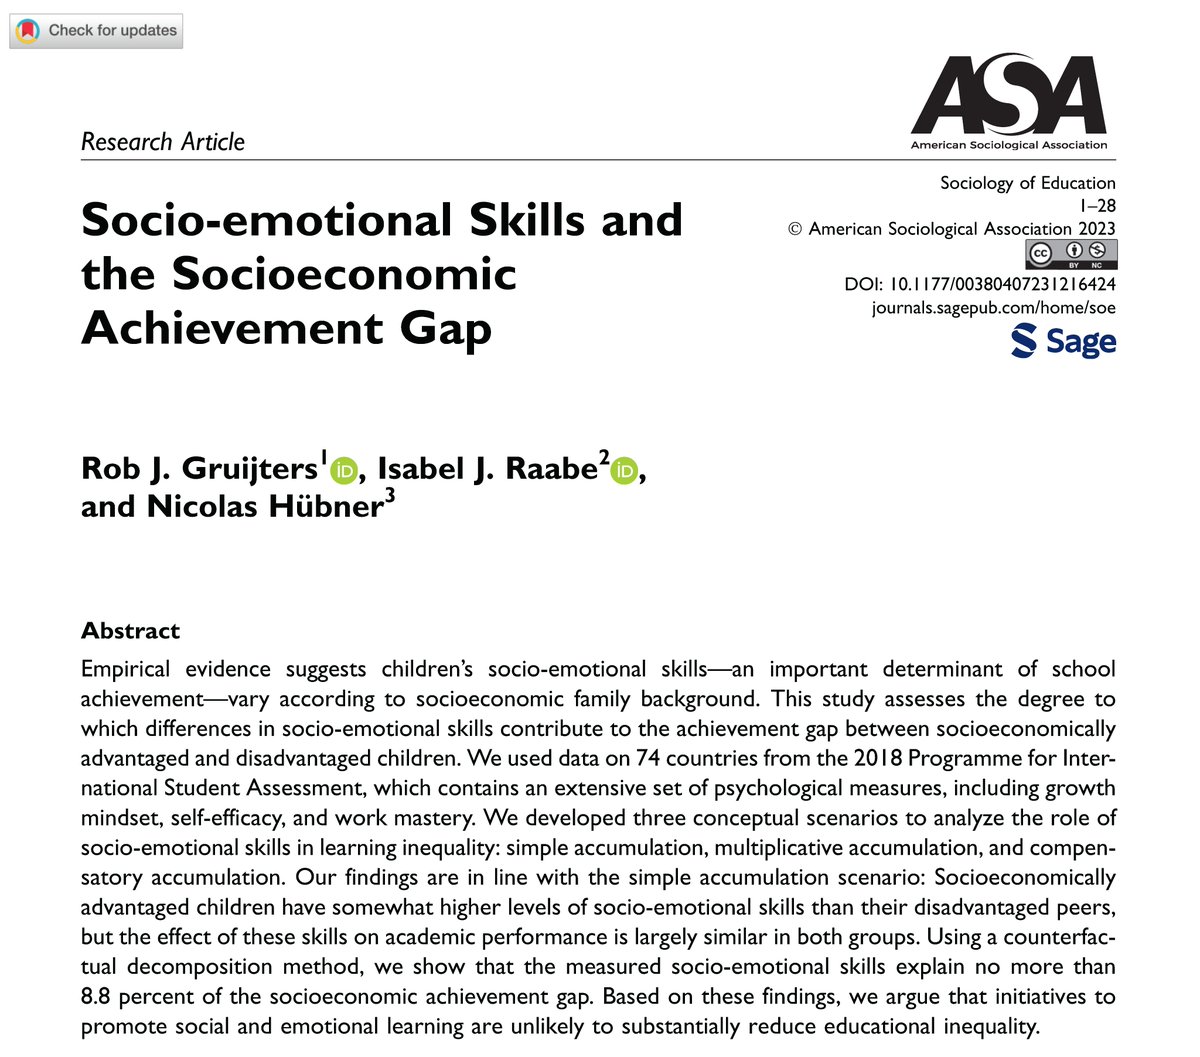 📊New paper out in @SocEducation! @n_hueb, Isabel Raabe & I look at the role of socio-emotional skills in educational inequality. Full paper (open access): journals.sagepub.com/doi/10.1177/00…, summary ⬇️1/n